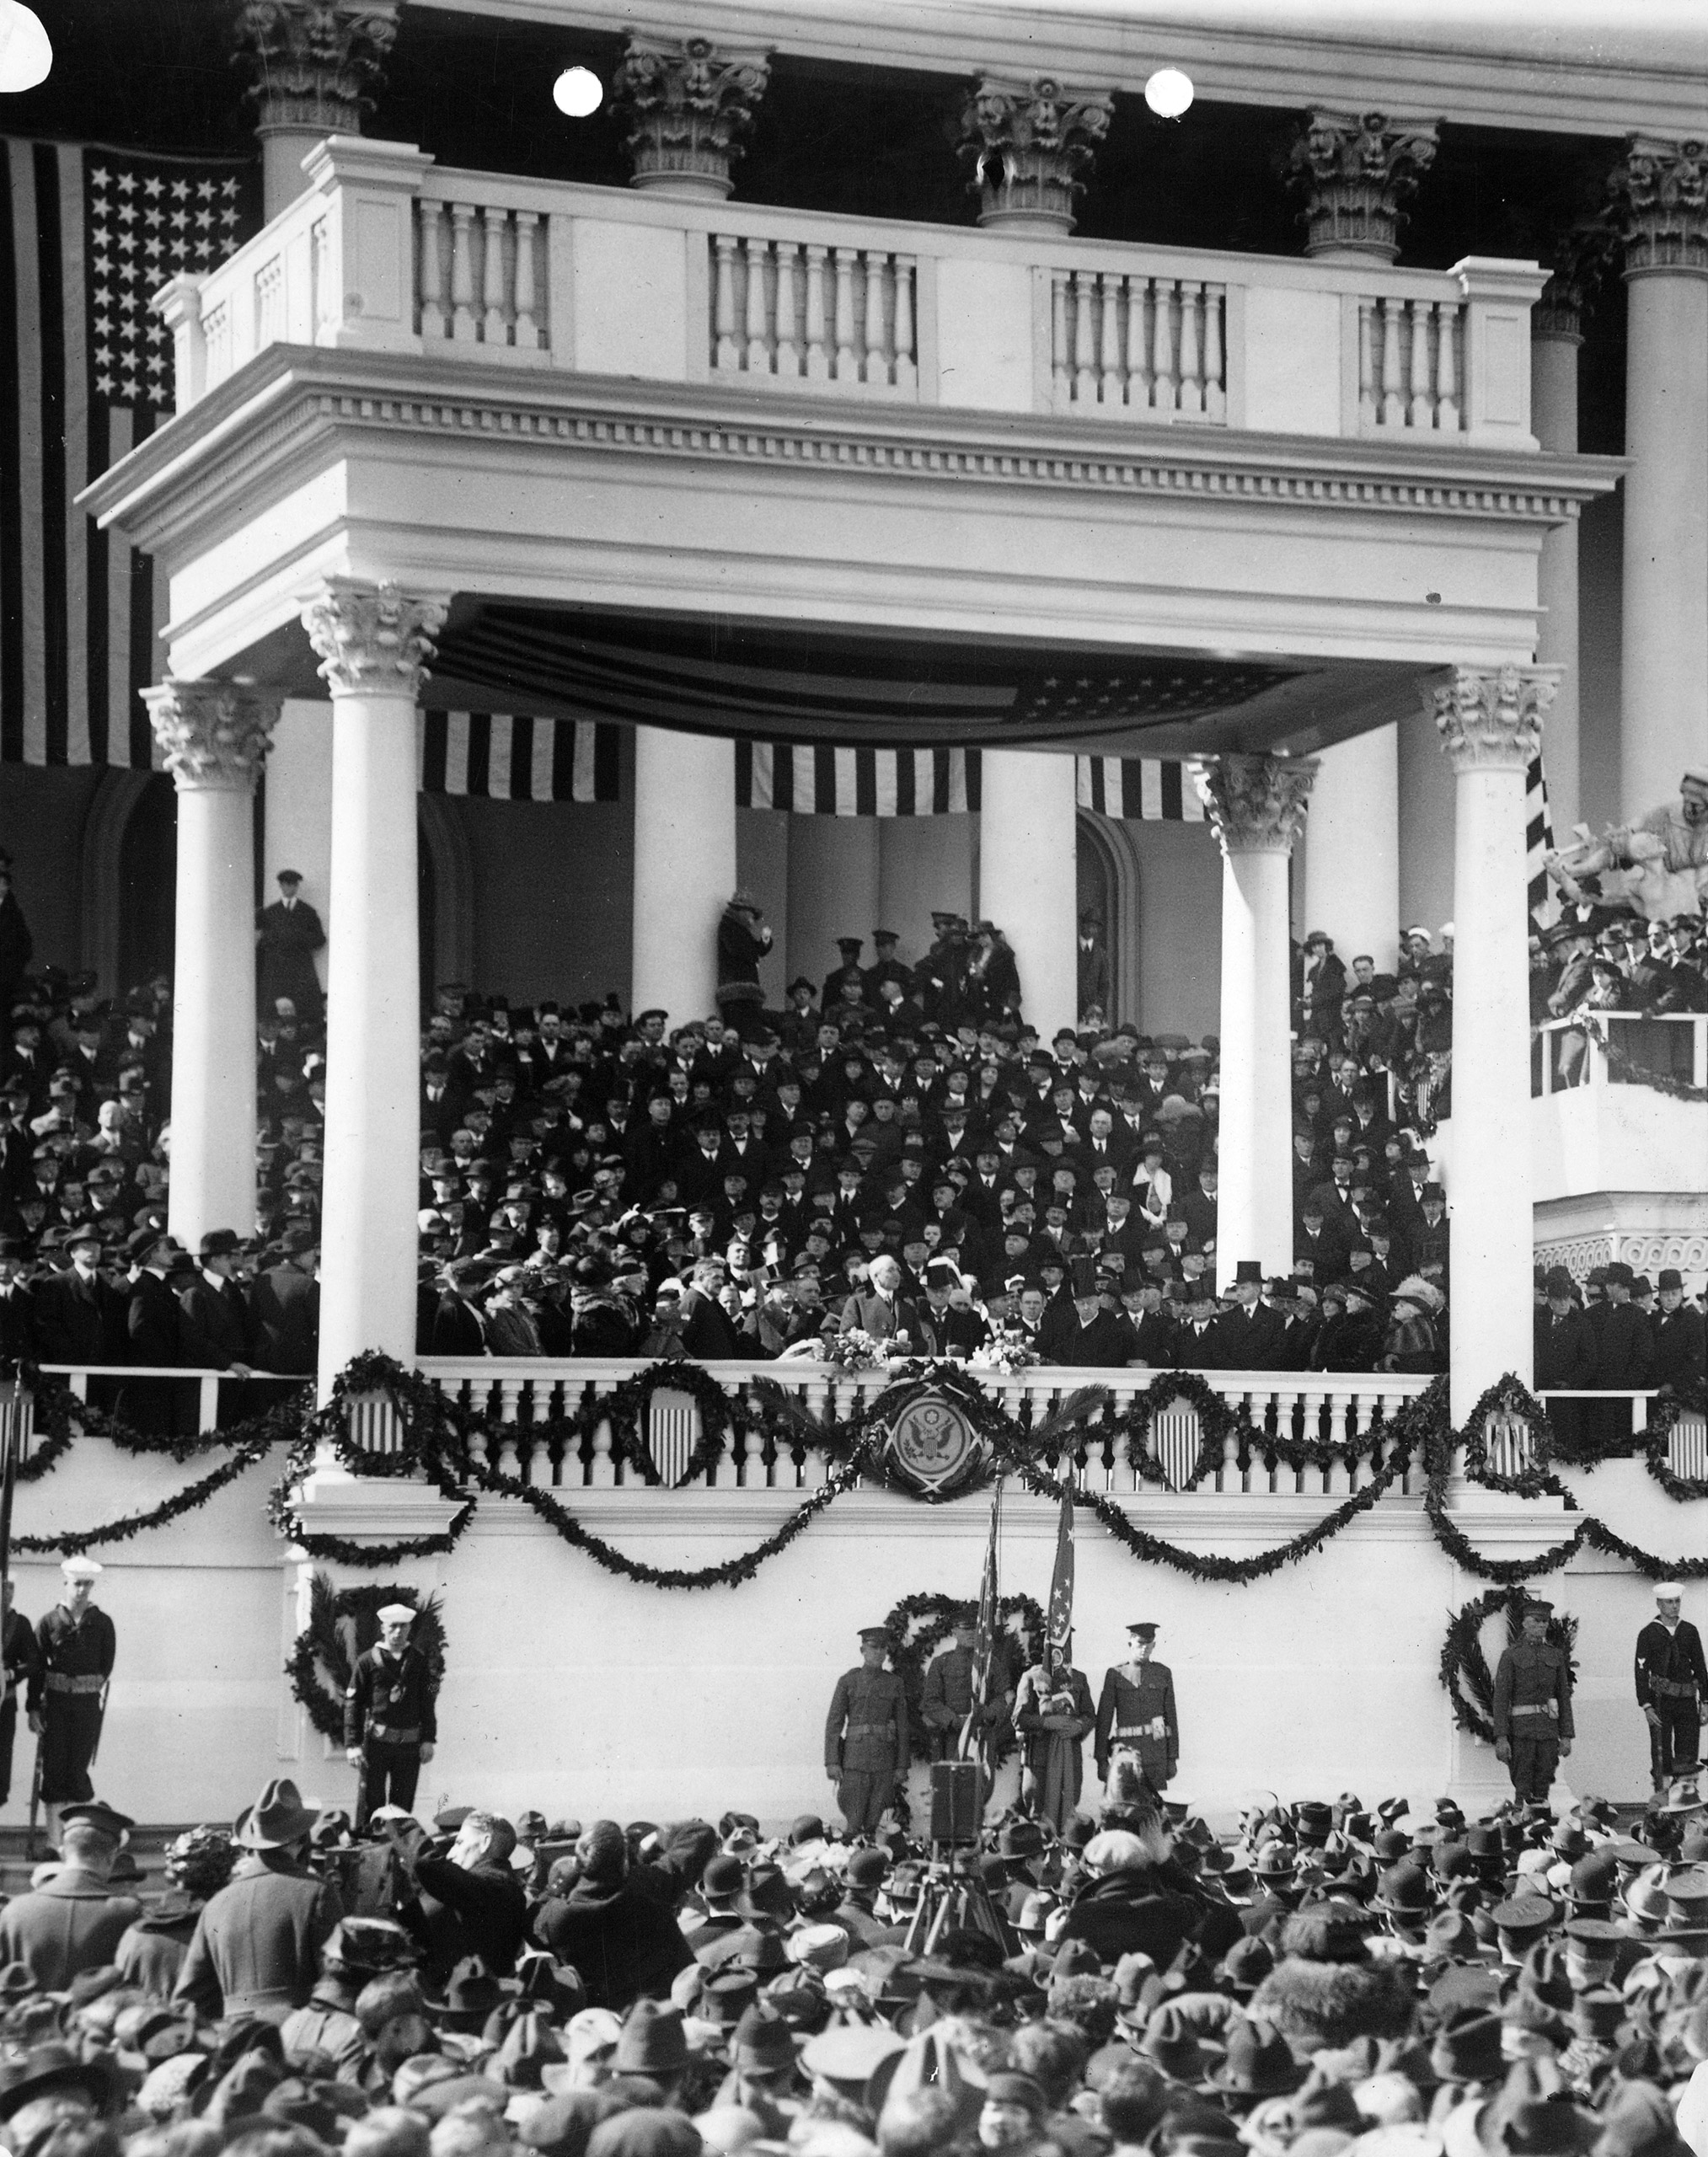 Warren G. Harding delivering his inaugural address on east portico of U.S. Capitol, March 4, 1921.